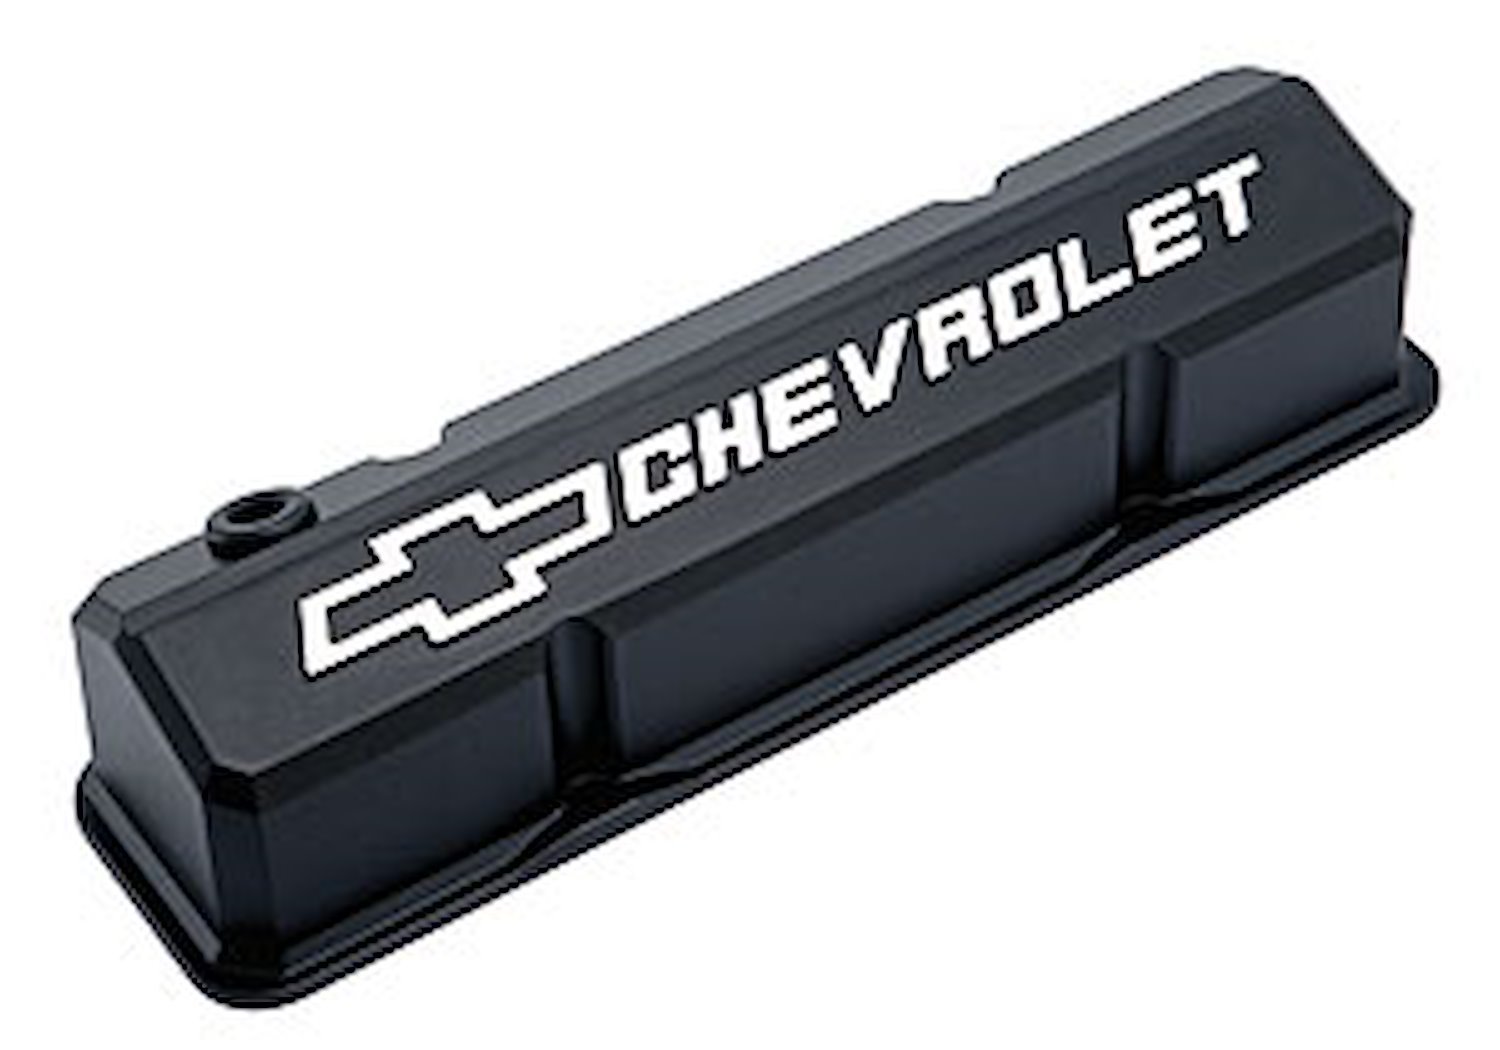 Die-Cast Slant-Edge Valve Covers for 1958-1986 Small Block Chevy with Chevrolet/Bowtie Raised Emblem in Black Crinkle Finish